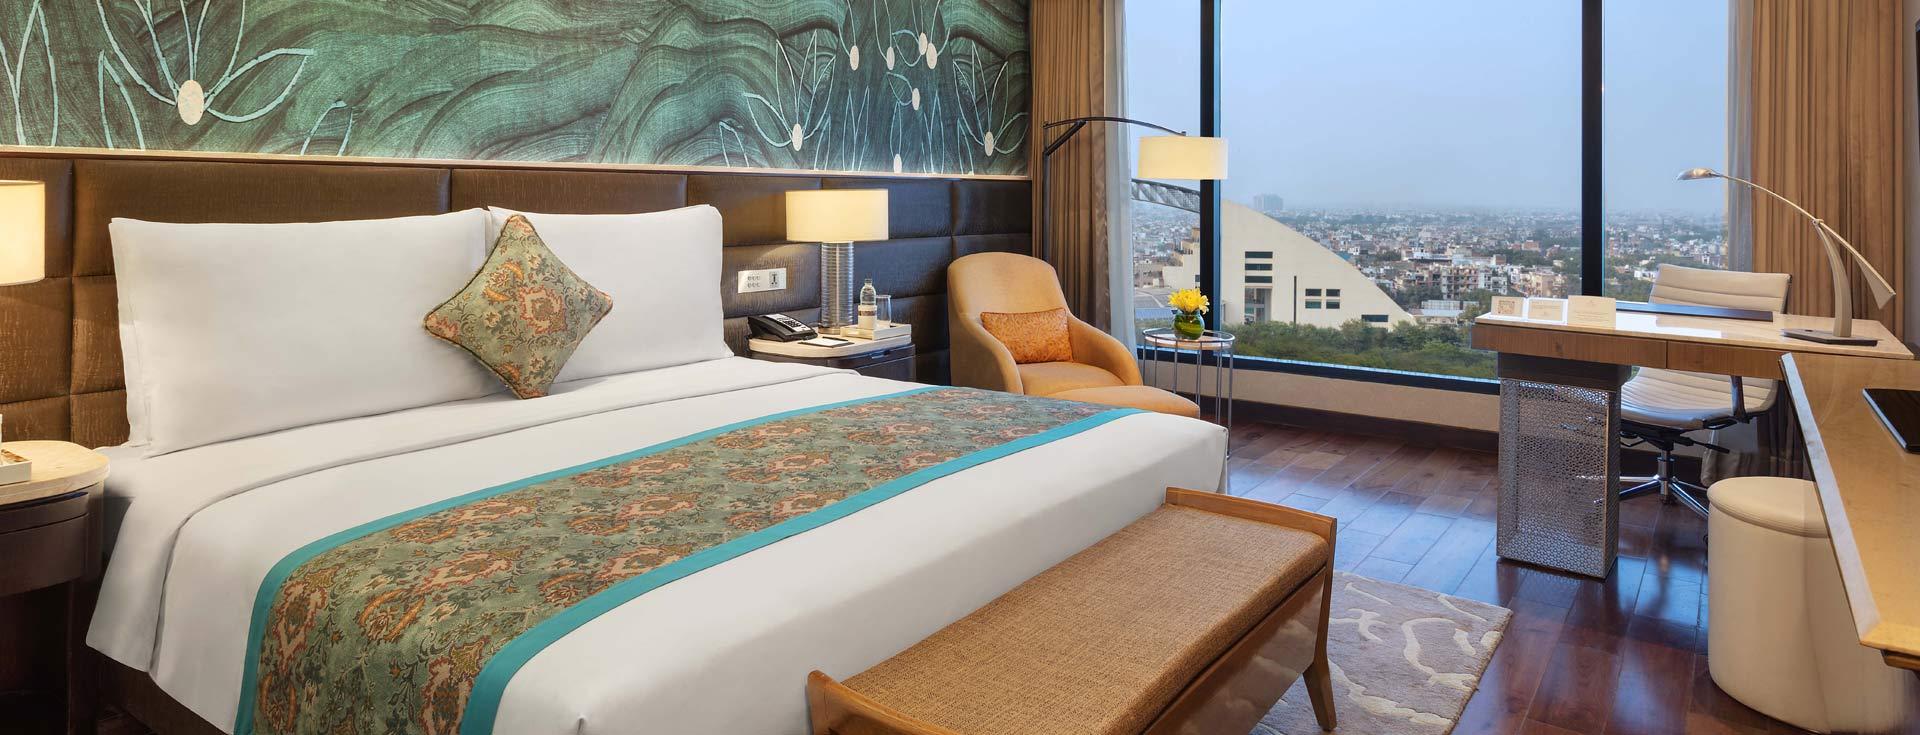 Deluxe Suite at The Leela Ambience Convention Hotel Delhi